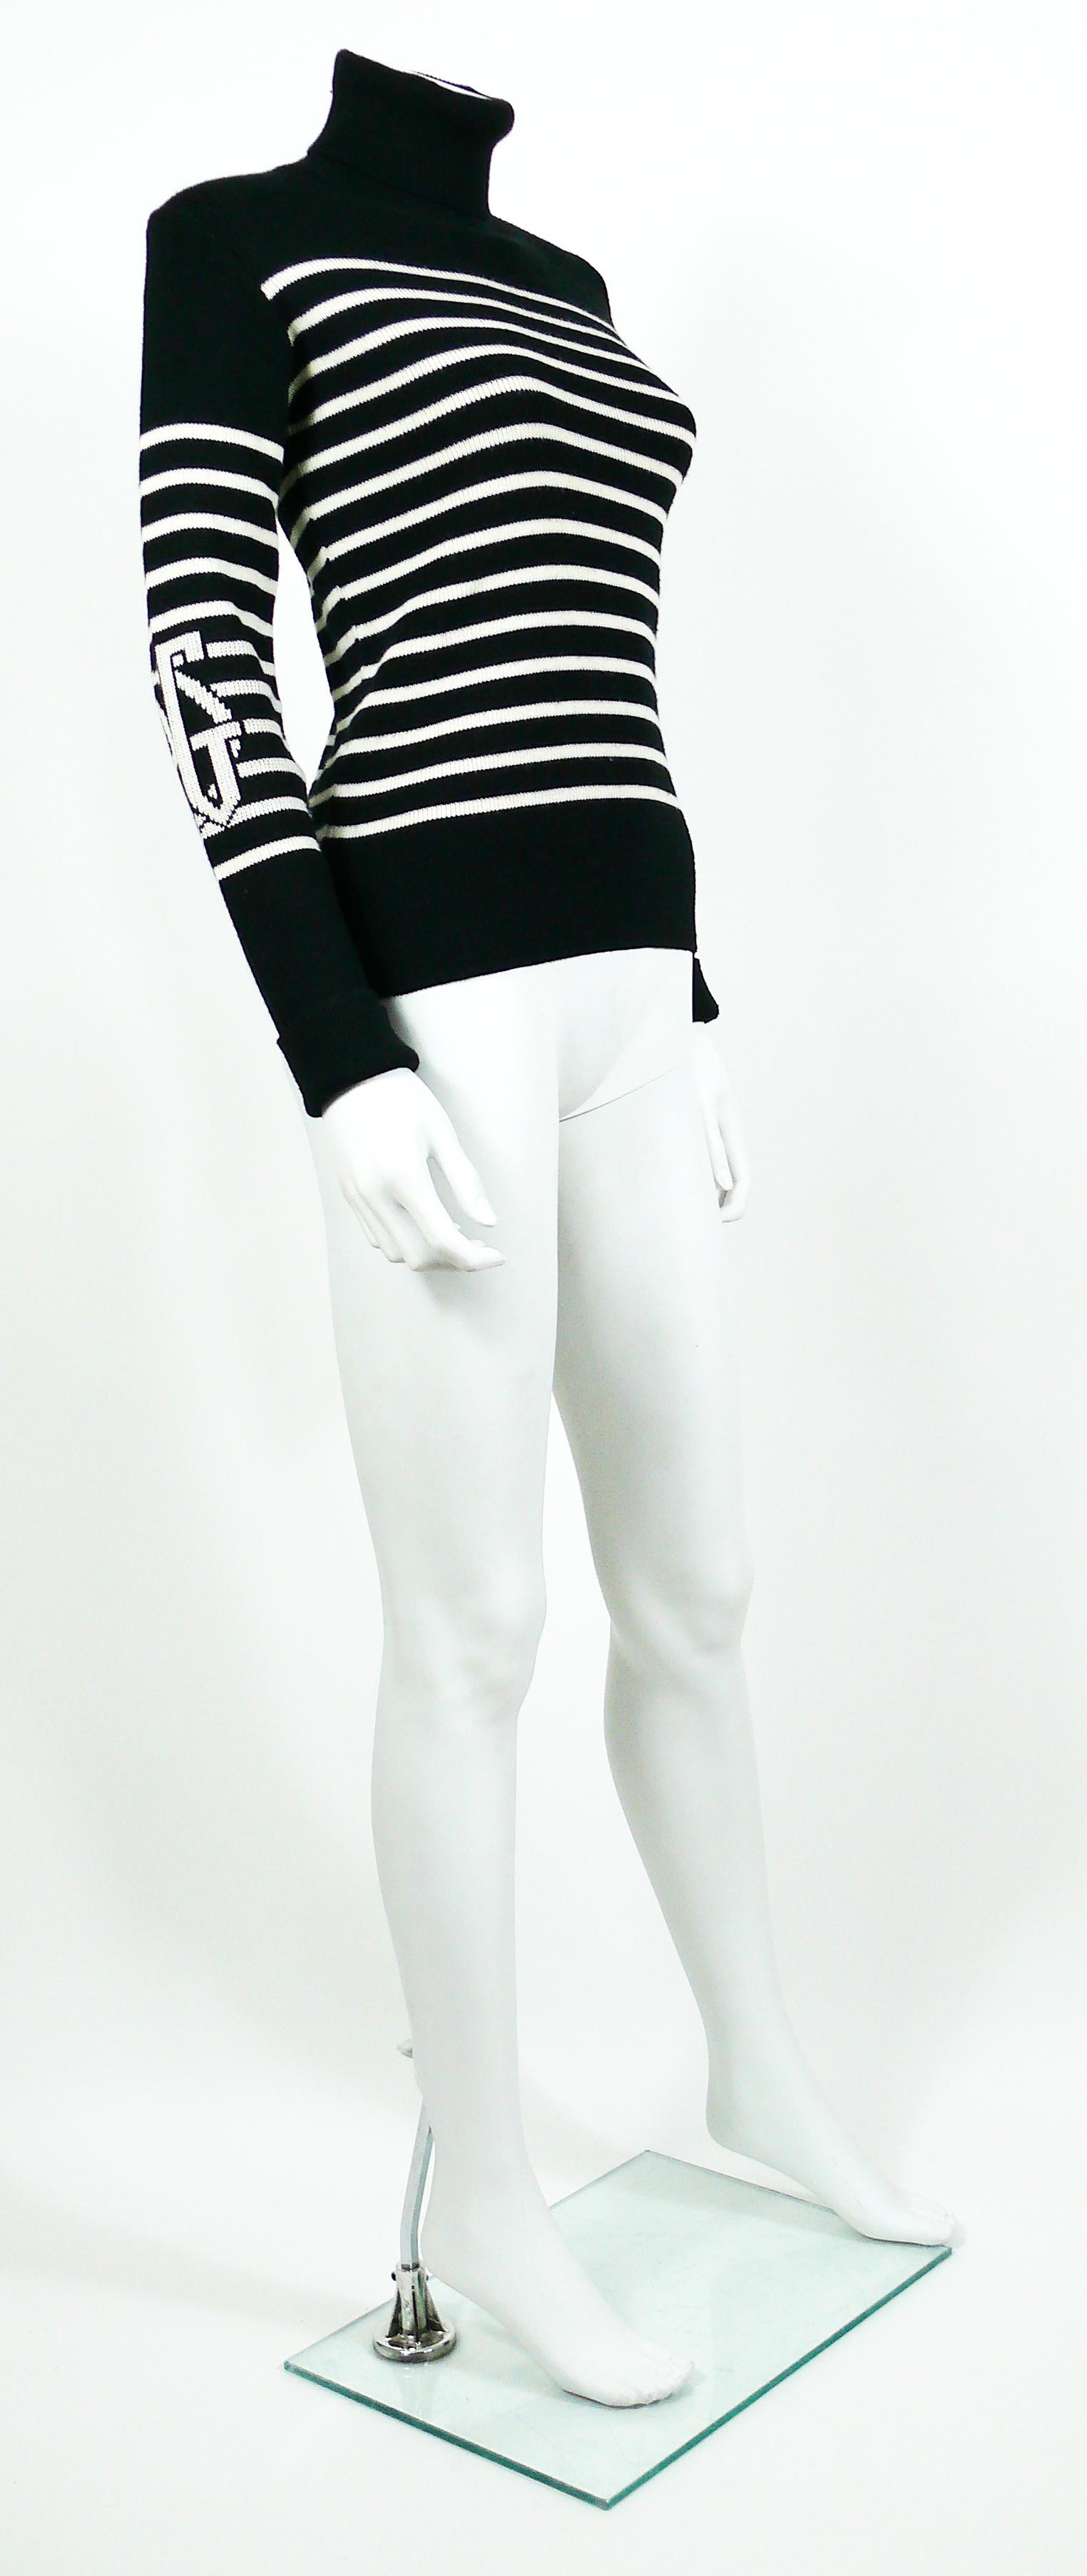 JEAN PAUL GAULTIER vintage iconic wool blend black/white matelot sweater featuring large a JPG monogram on each sleeve.

Turtle neck.
Long sleeves.

Label reads JPG JEAN'S.
Made in Italy.

Composition label reads : 50% Acrylic / 50% Wool / 9%